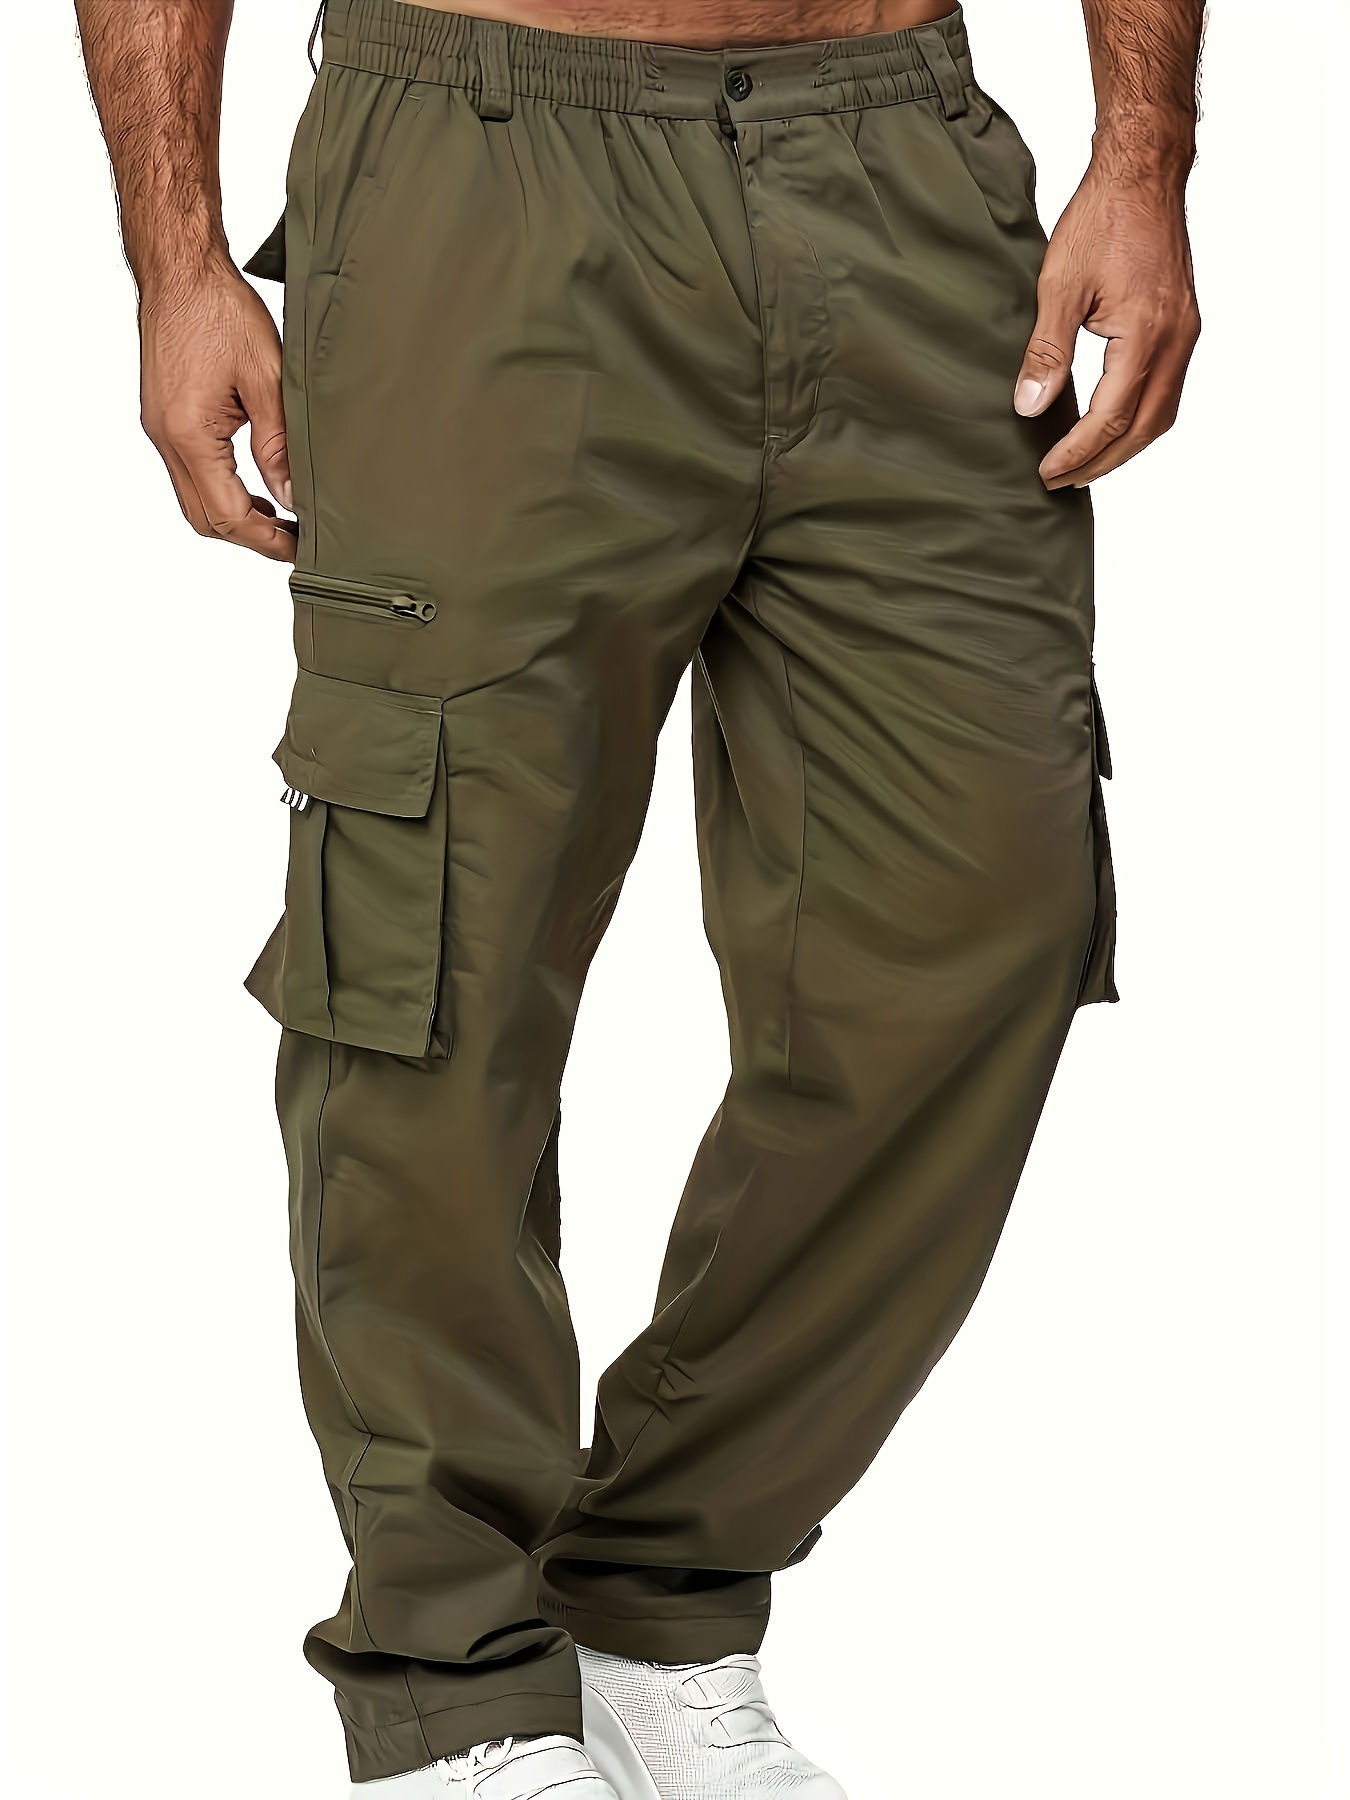 mens casual multi pocket elastic waist cargo pants loose fit outdoor sports trousers for mountain climbing